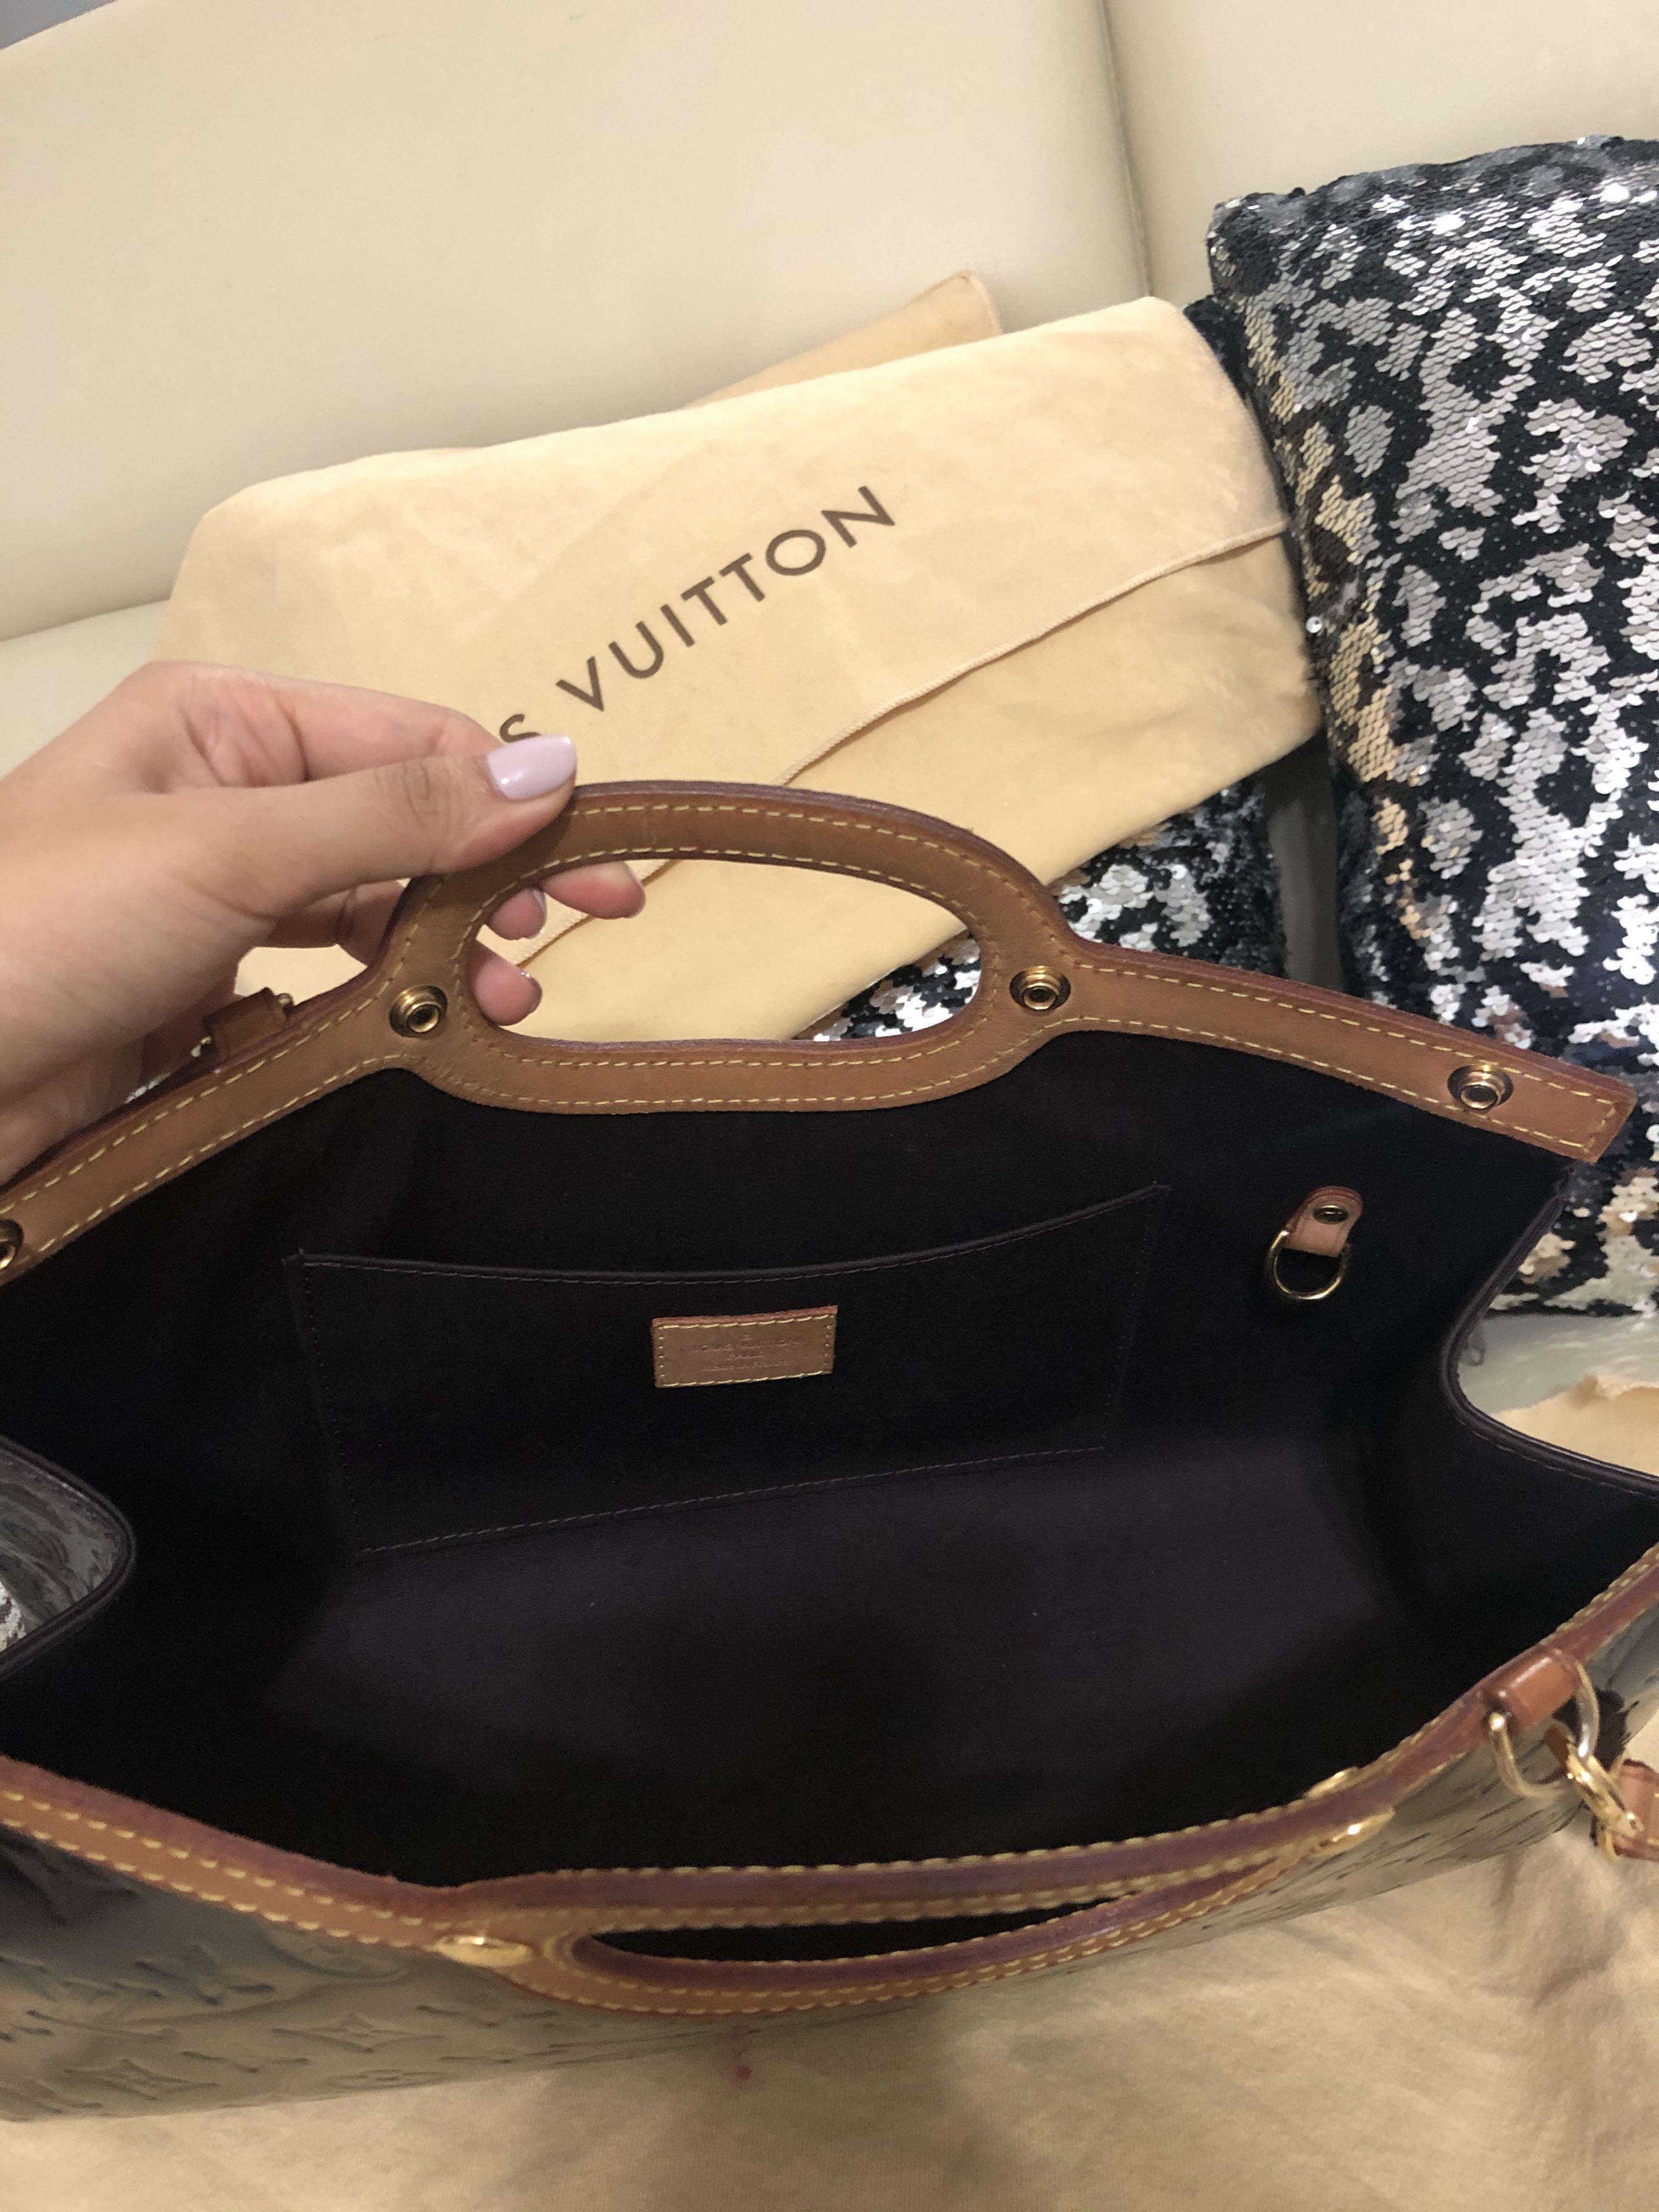 Authentic LV Vernis Roxbury Drive Bag (With shoulder strap) VIEW PHOTOS FOR SERIAL NUMBER ...